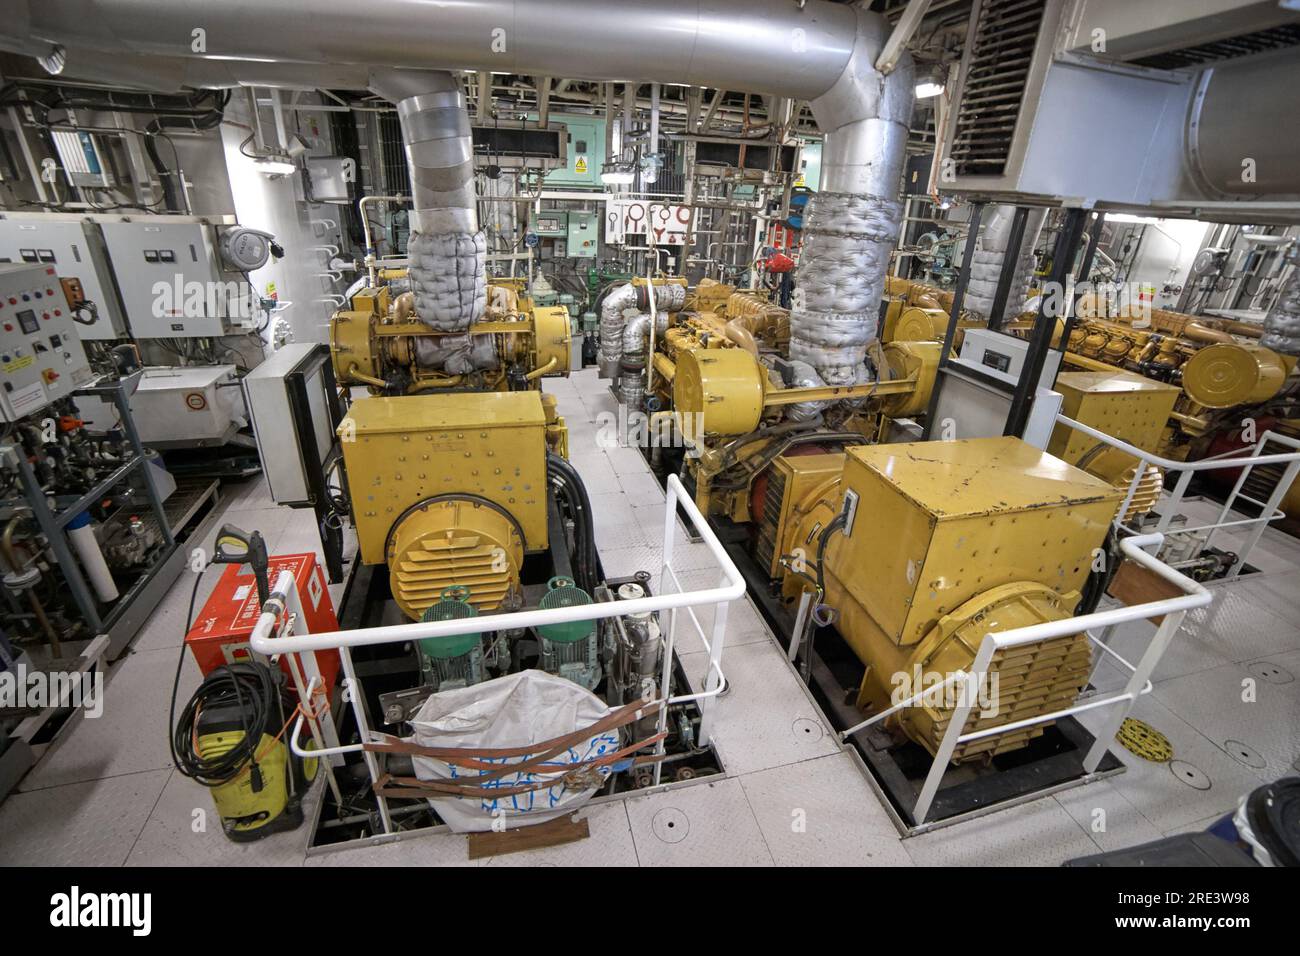 Engine room view with diesel engines and generators. Stock Photo